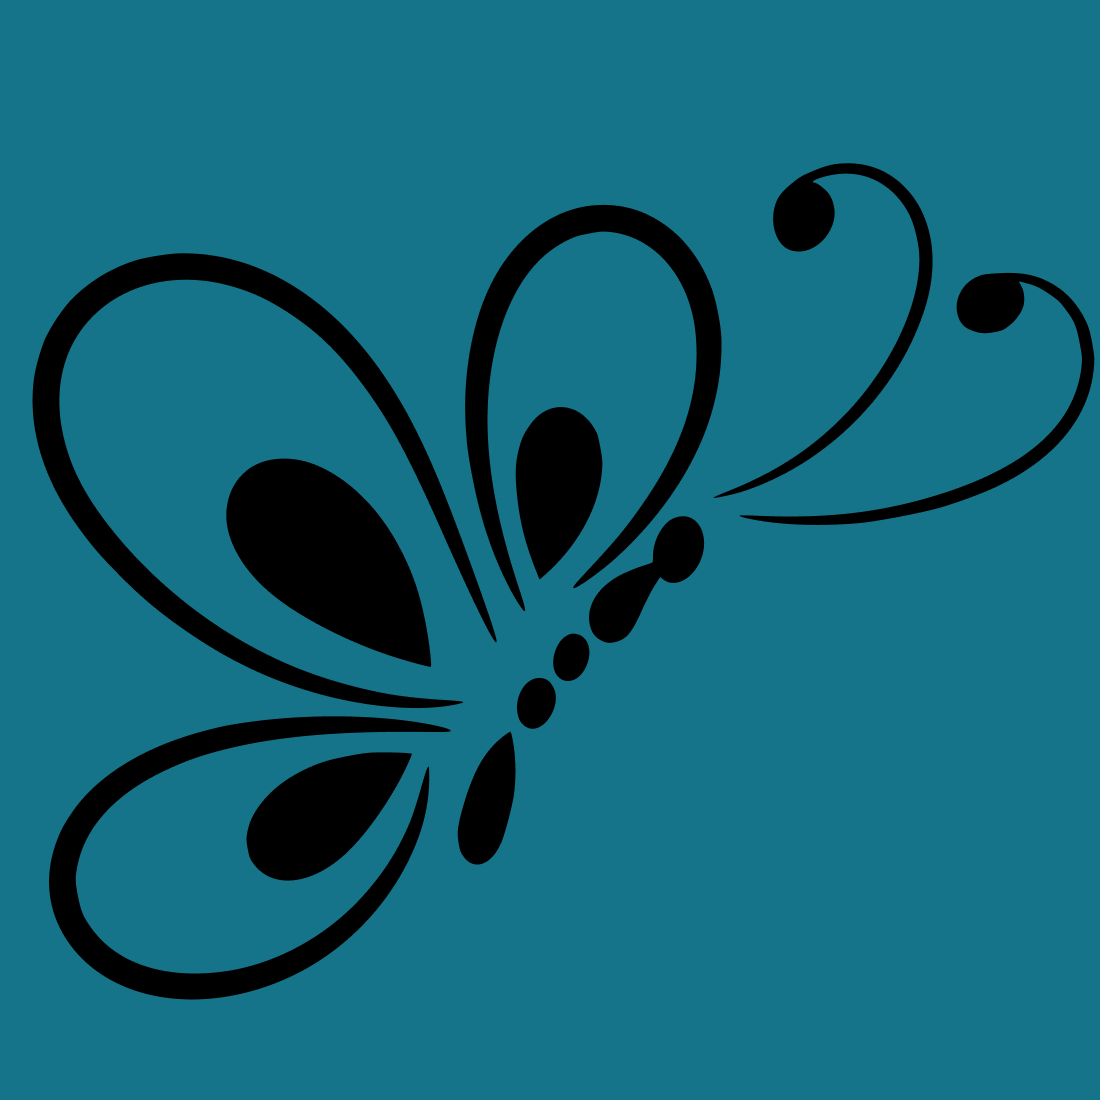 Insect Butterfly Design Outline facebook.